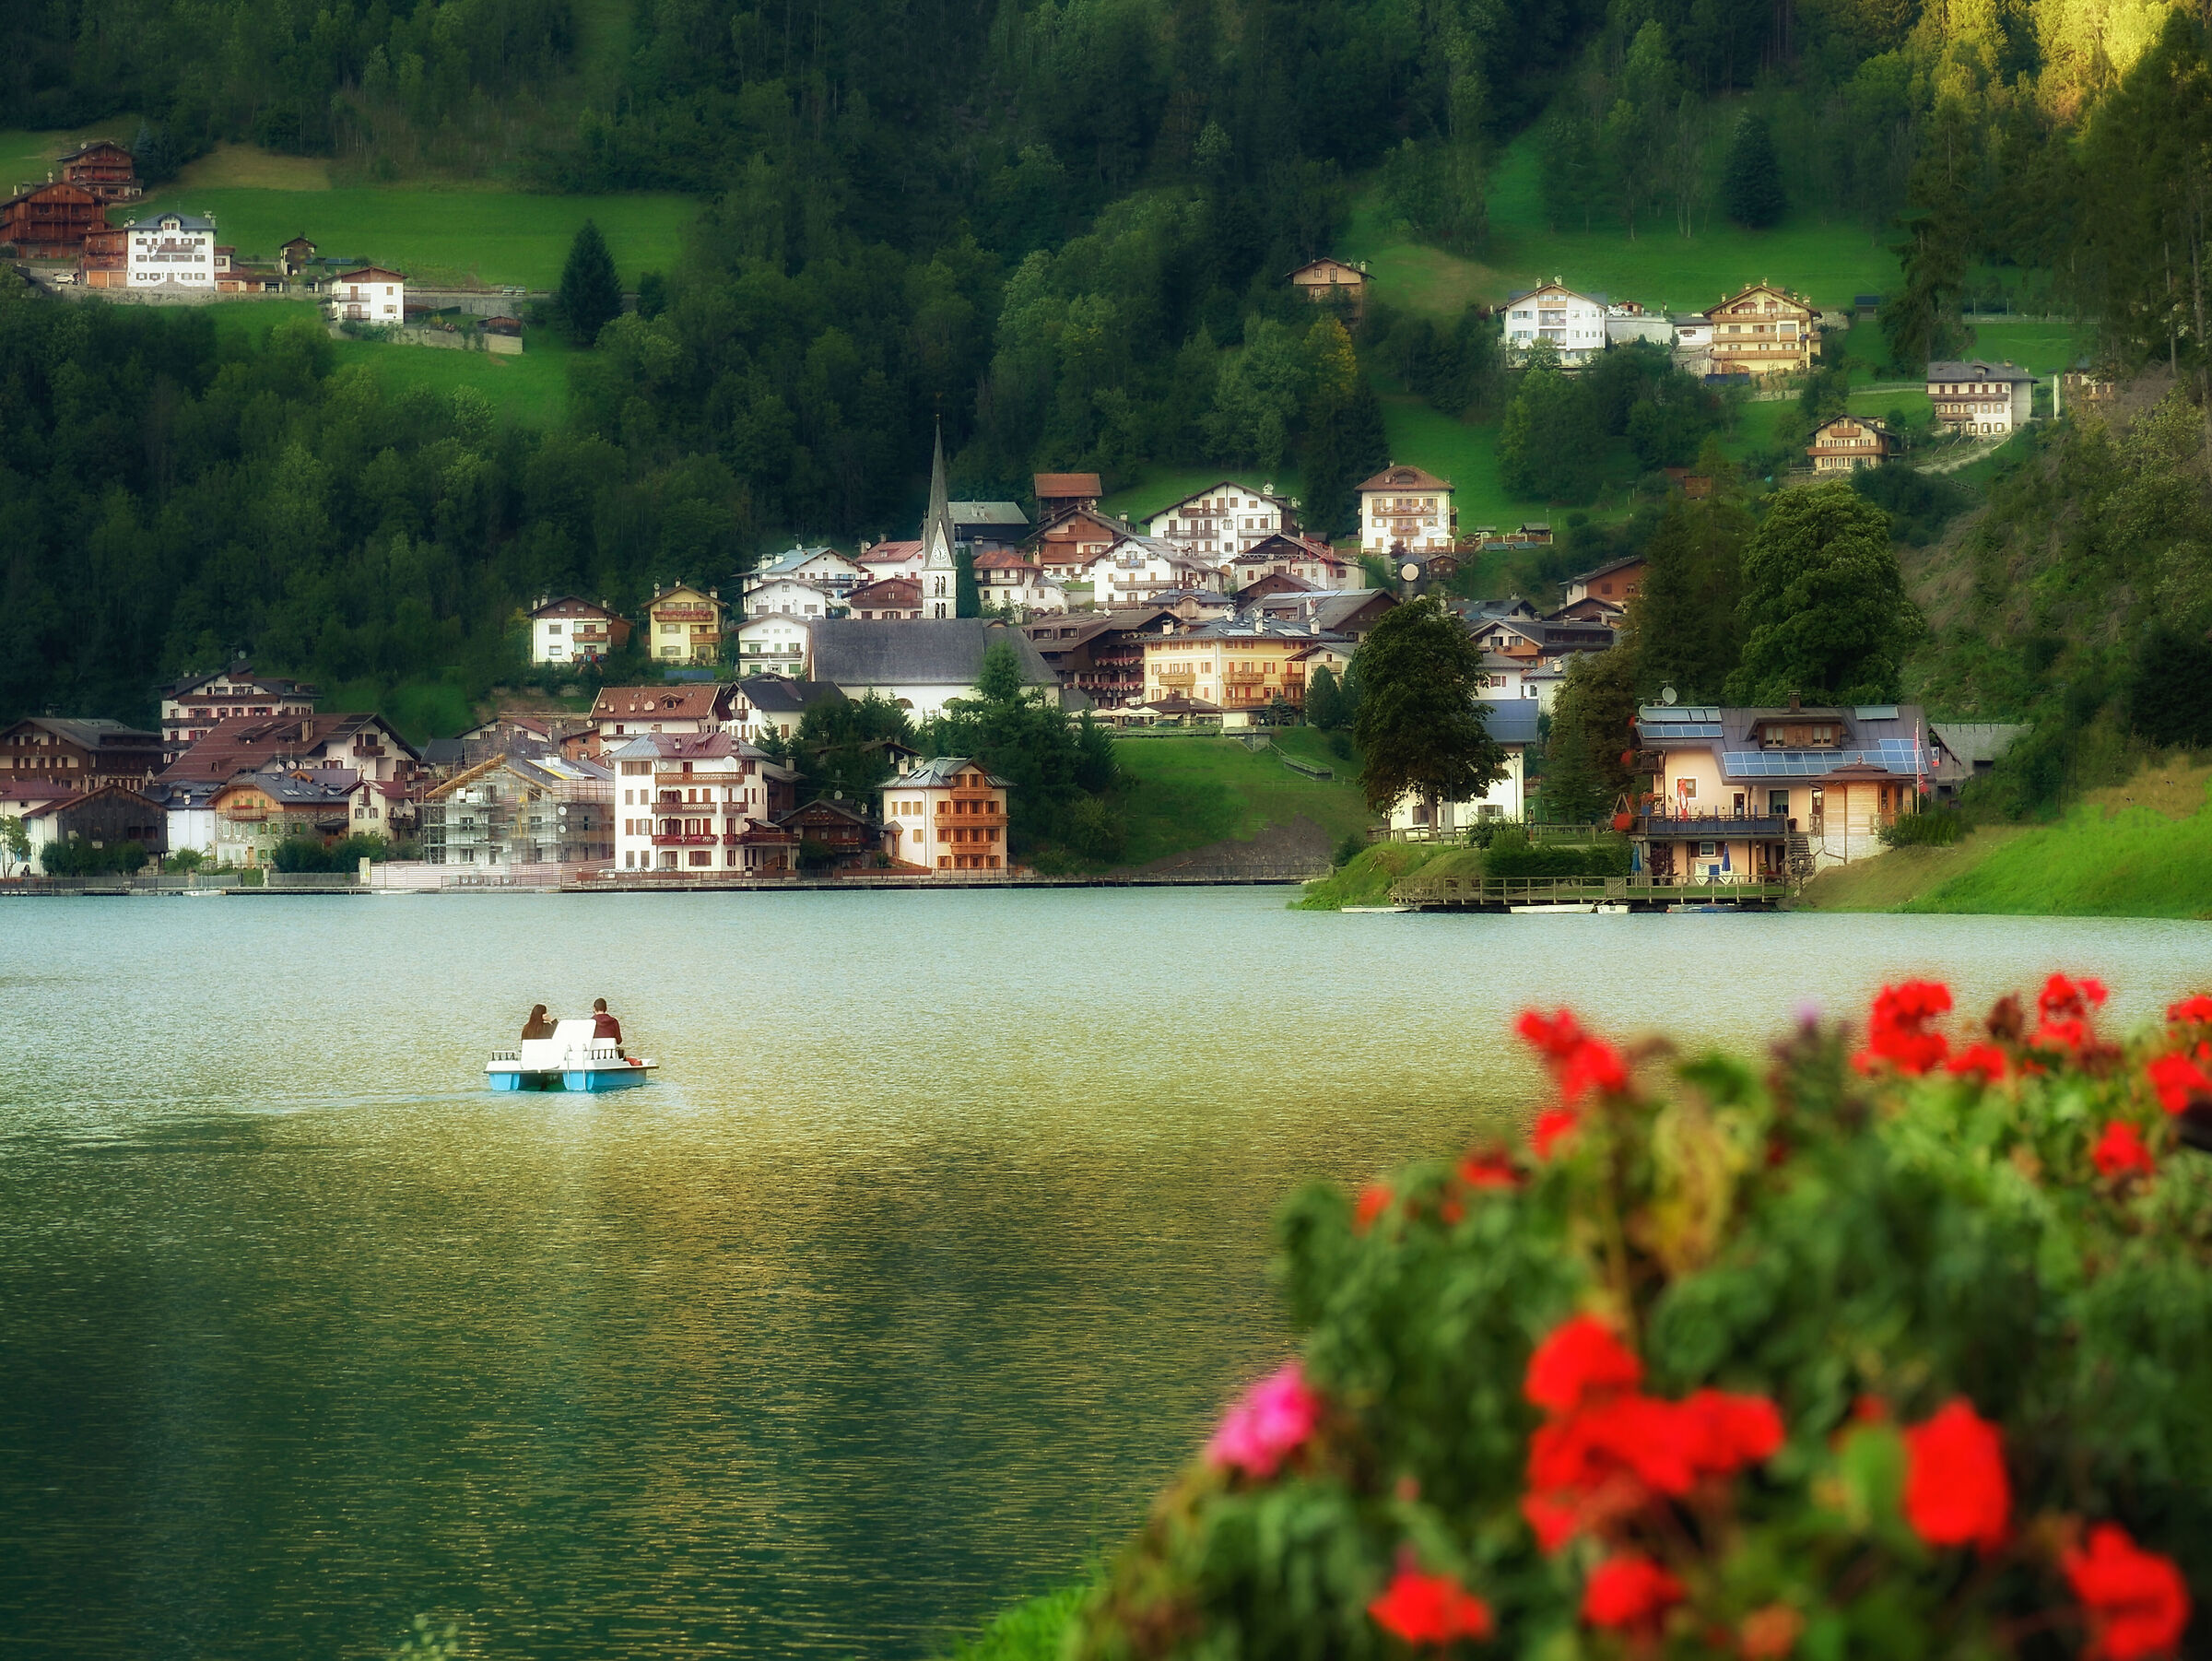 With the pedal boat at Lake Alleghe...